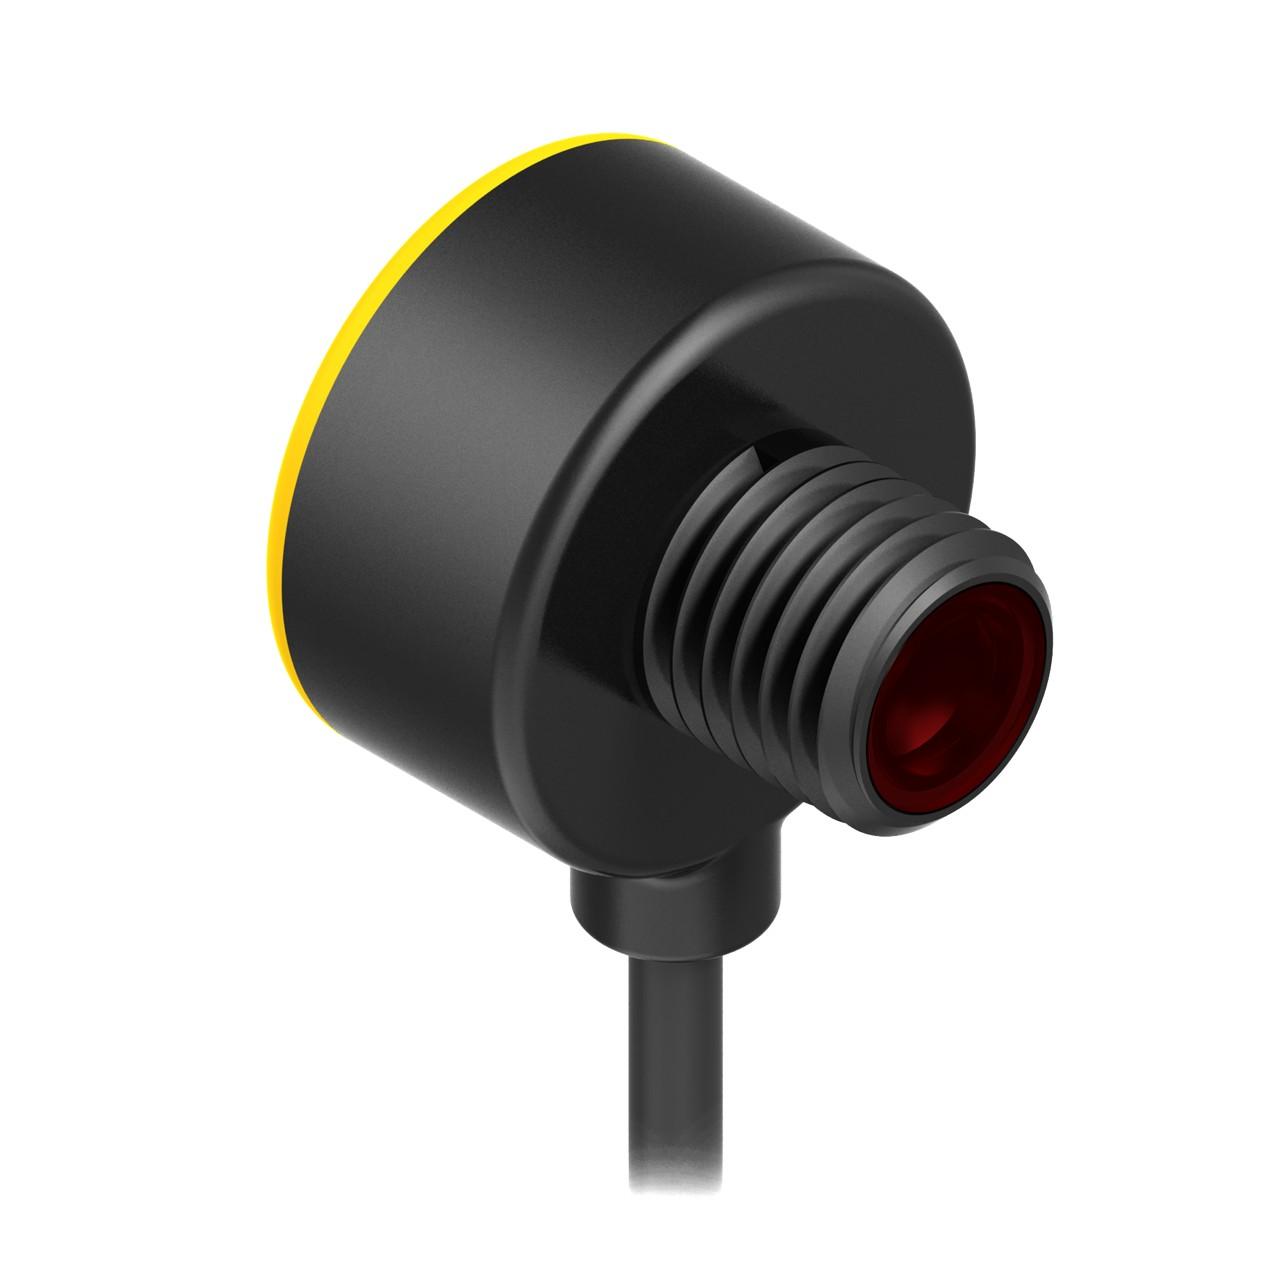 Banner T86EV Photo-electric emitter with through-beam system / opposed mode - Banner Engineering (EZ-BEAM series - T8 series) - Part #66671 - Visible red light (660nm) - Supply voltage 10Vdc-30Vdc (12Vdc / 24Vdc nom.) - Pre-wired with 6.5ft / 2m cable terminated with 